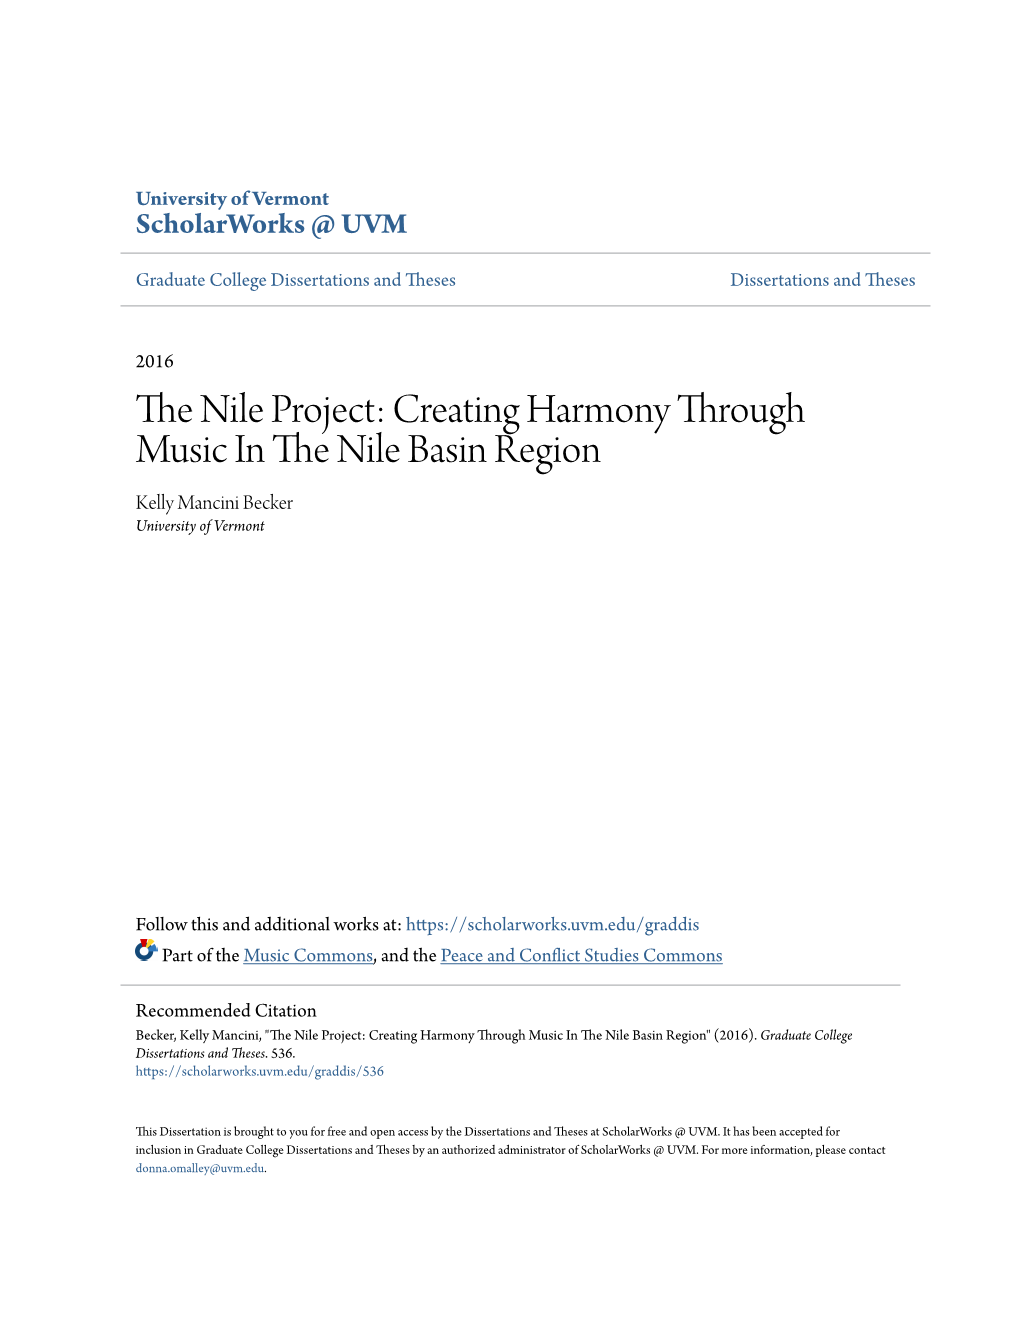 The Nile Project: Creating Harmony Through Music in the Nile Basin Region